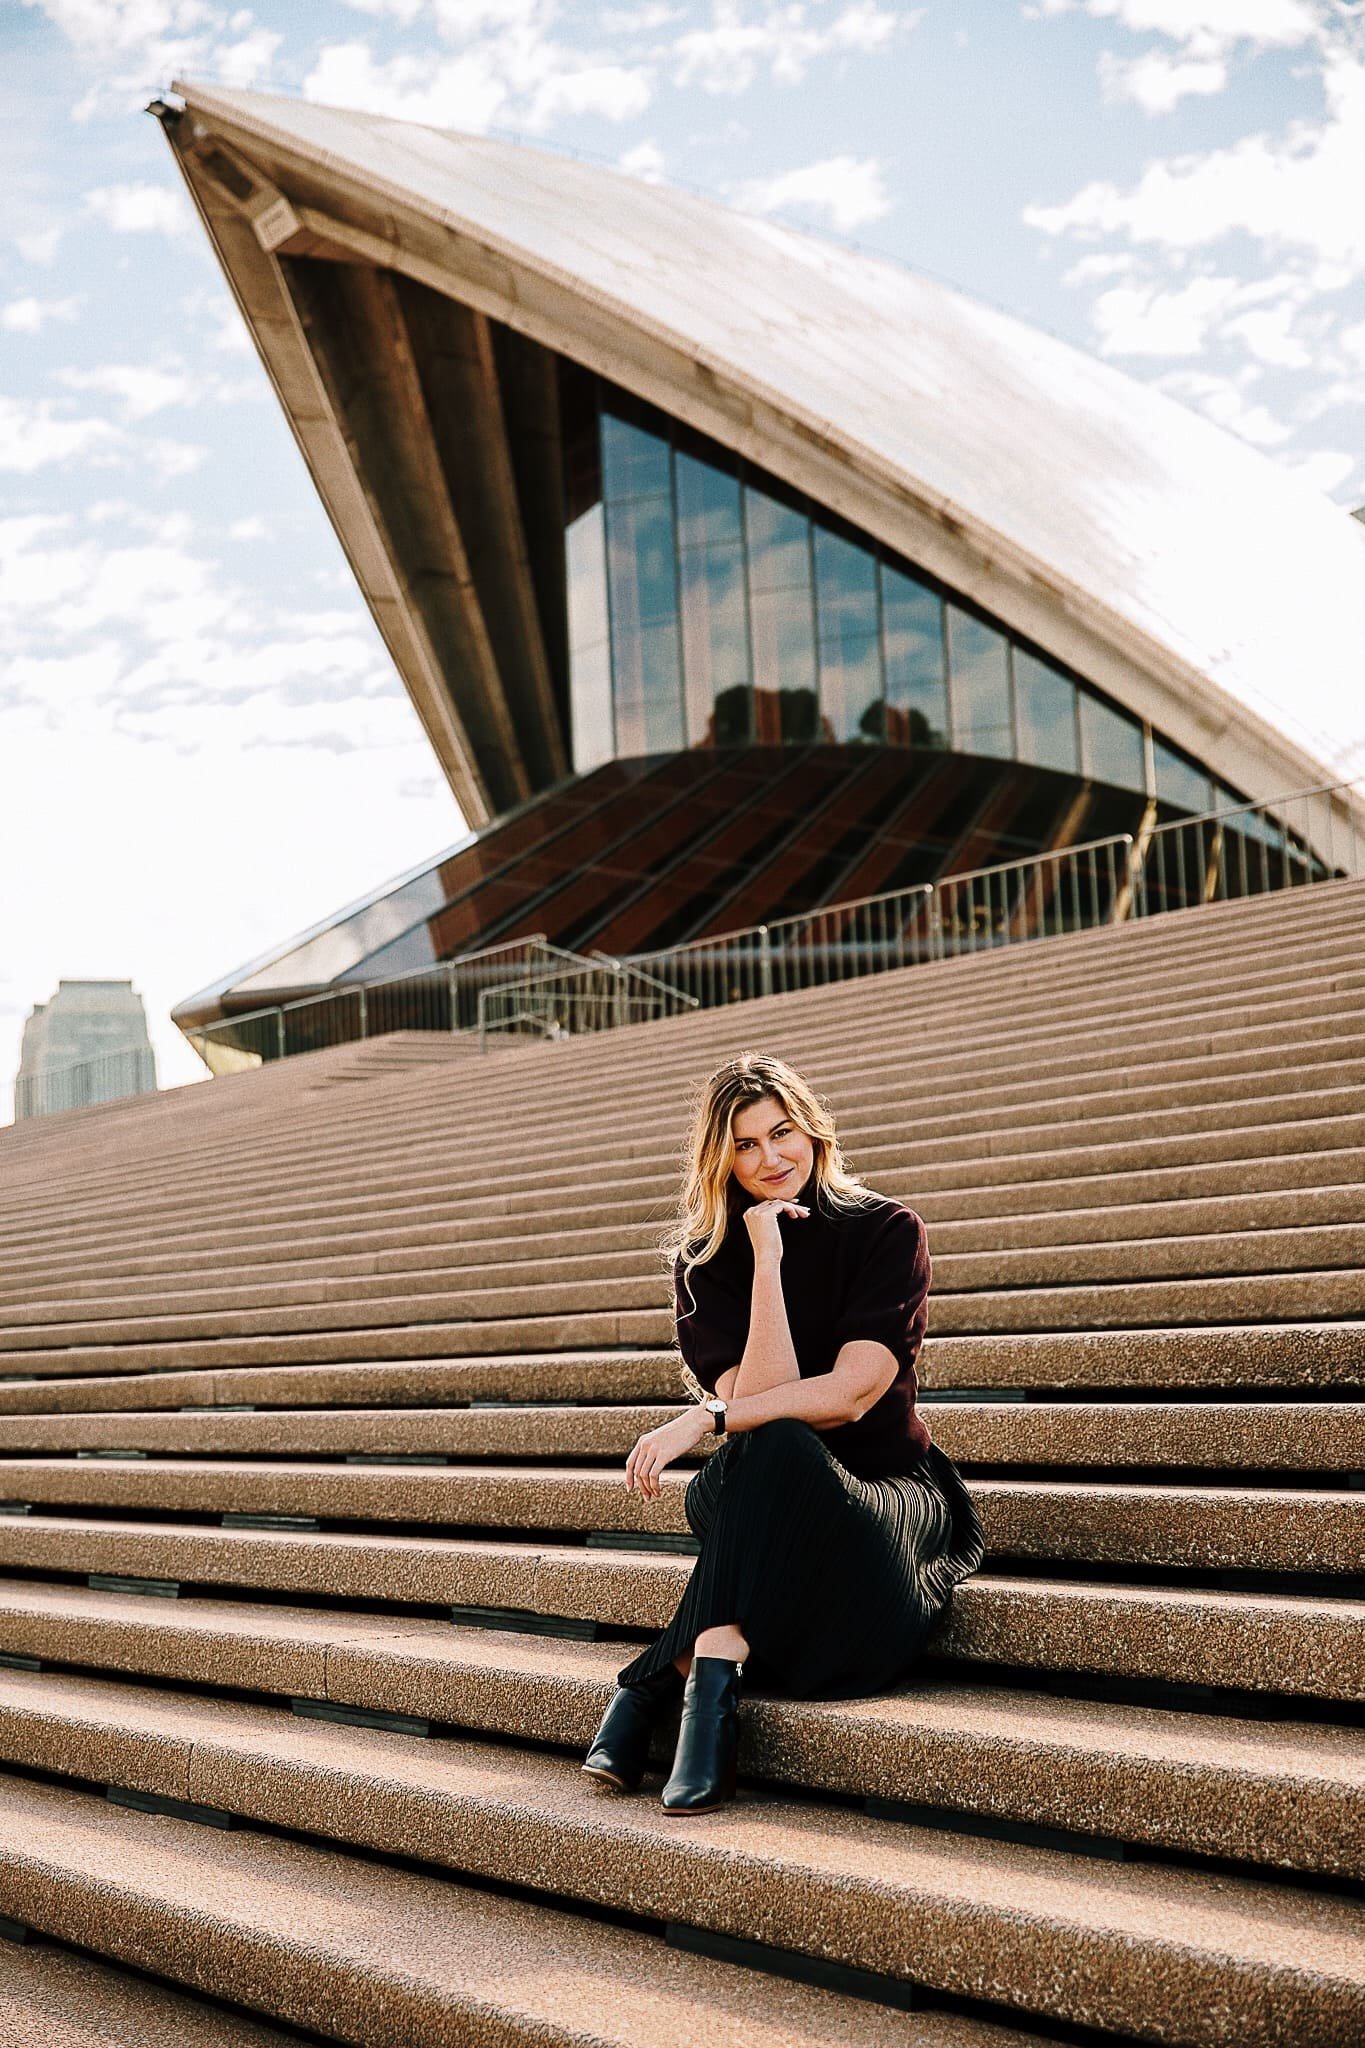 Sitting in the stairs of Sydney Opera House - Sydney - New South Wales (NSW) - Australia